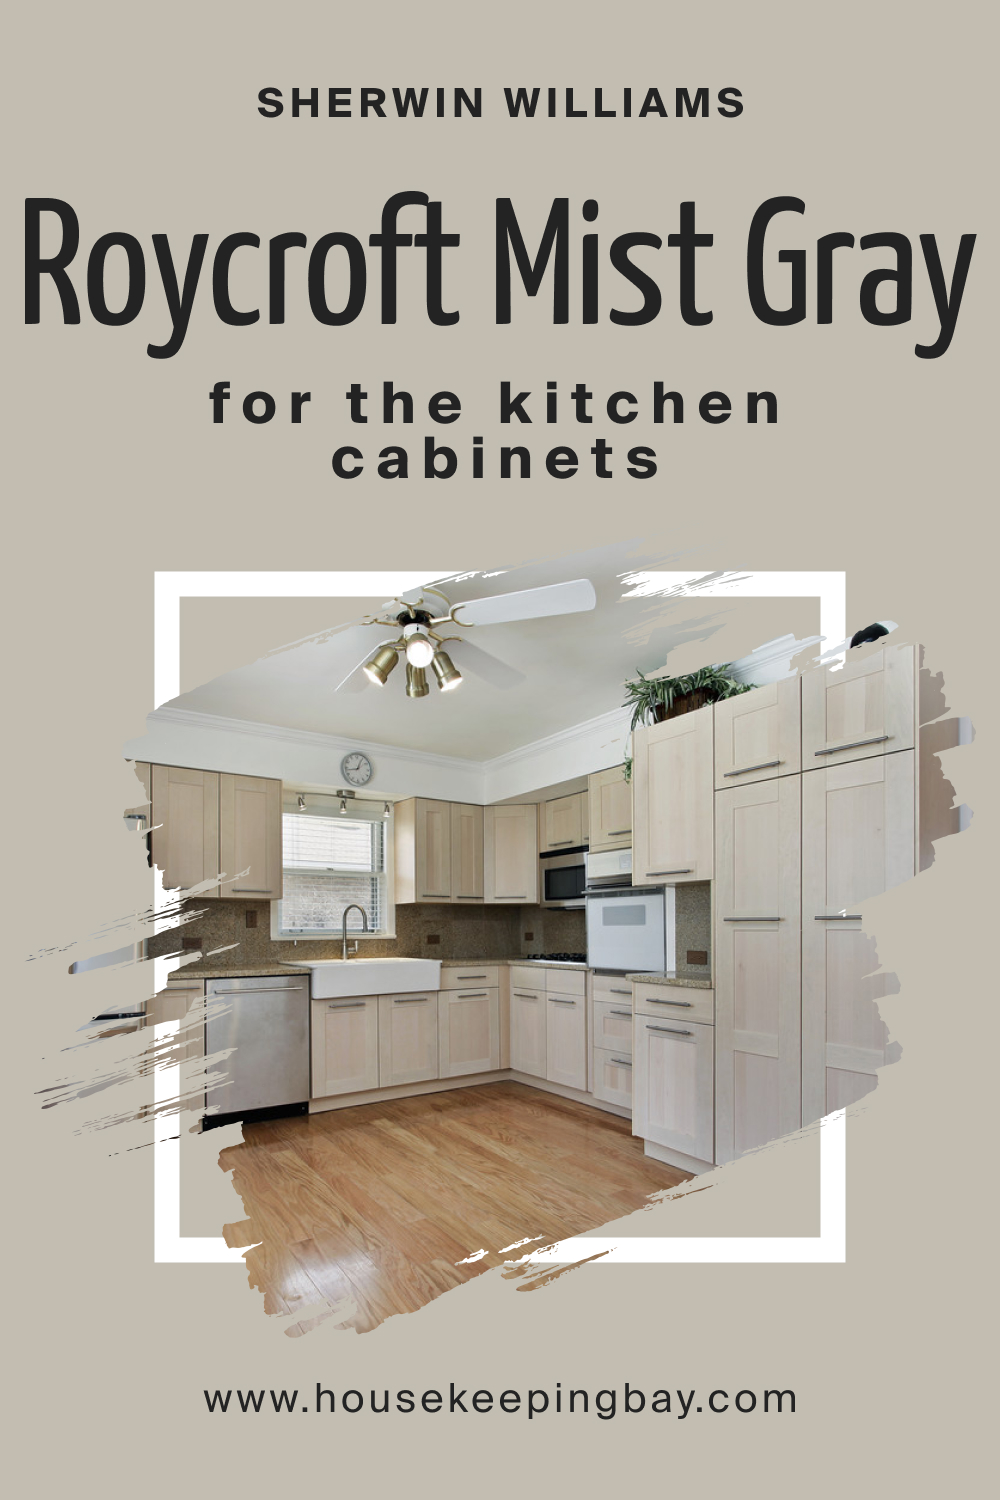 Sherwin Williams. SW 2844 Roycroft Mist Gray For the Kitchens Cabinets